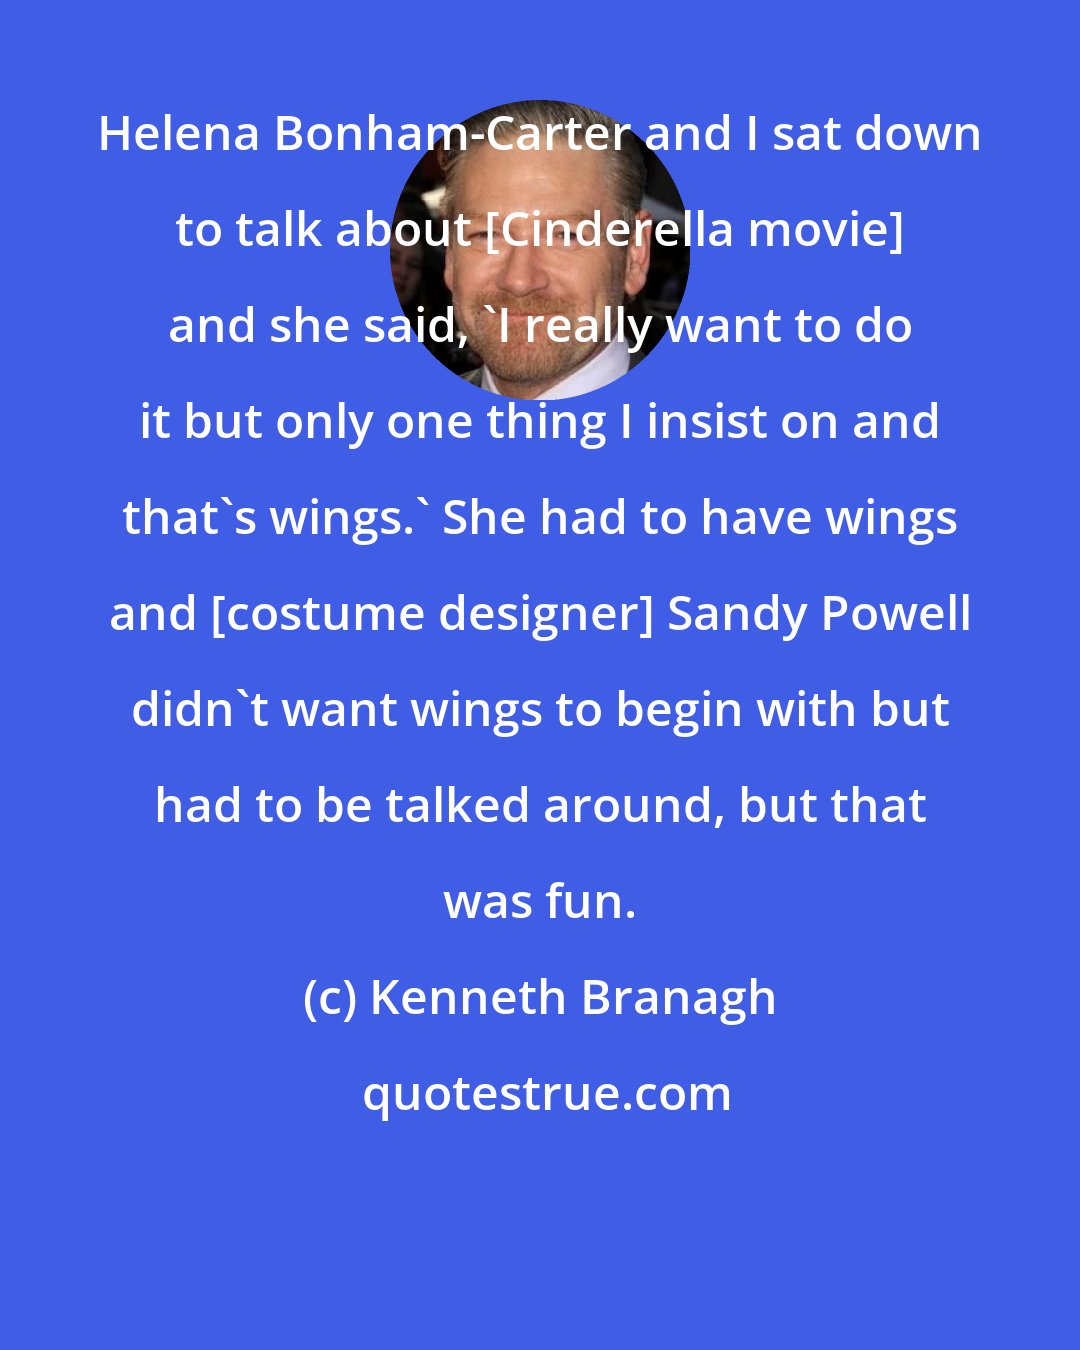 Kenneth Branagh: Helena Bonham-Carter and I sat down to talk about [Cinderella movie] and she said, 'I really want to do it but only one thing I insist on and that's wings.' She had to have wings and [costume designer] Sandy Powell didn't want wings to begin with but had to be talked around, but that was fun.